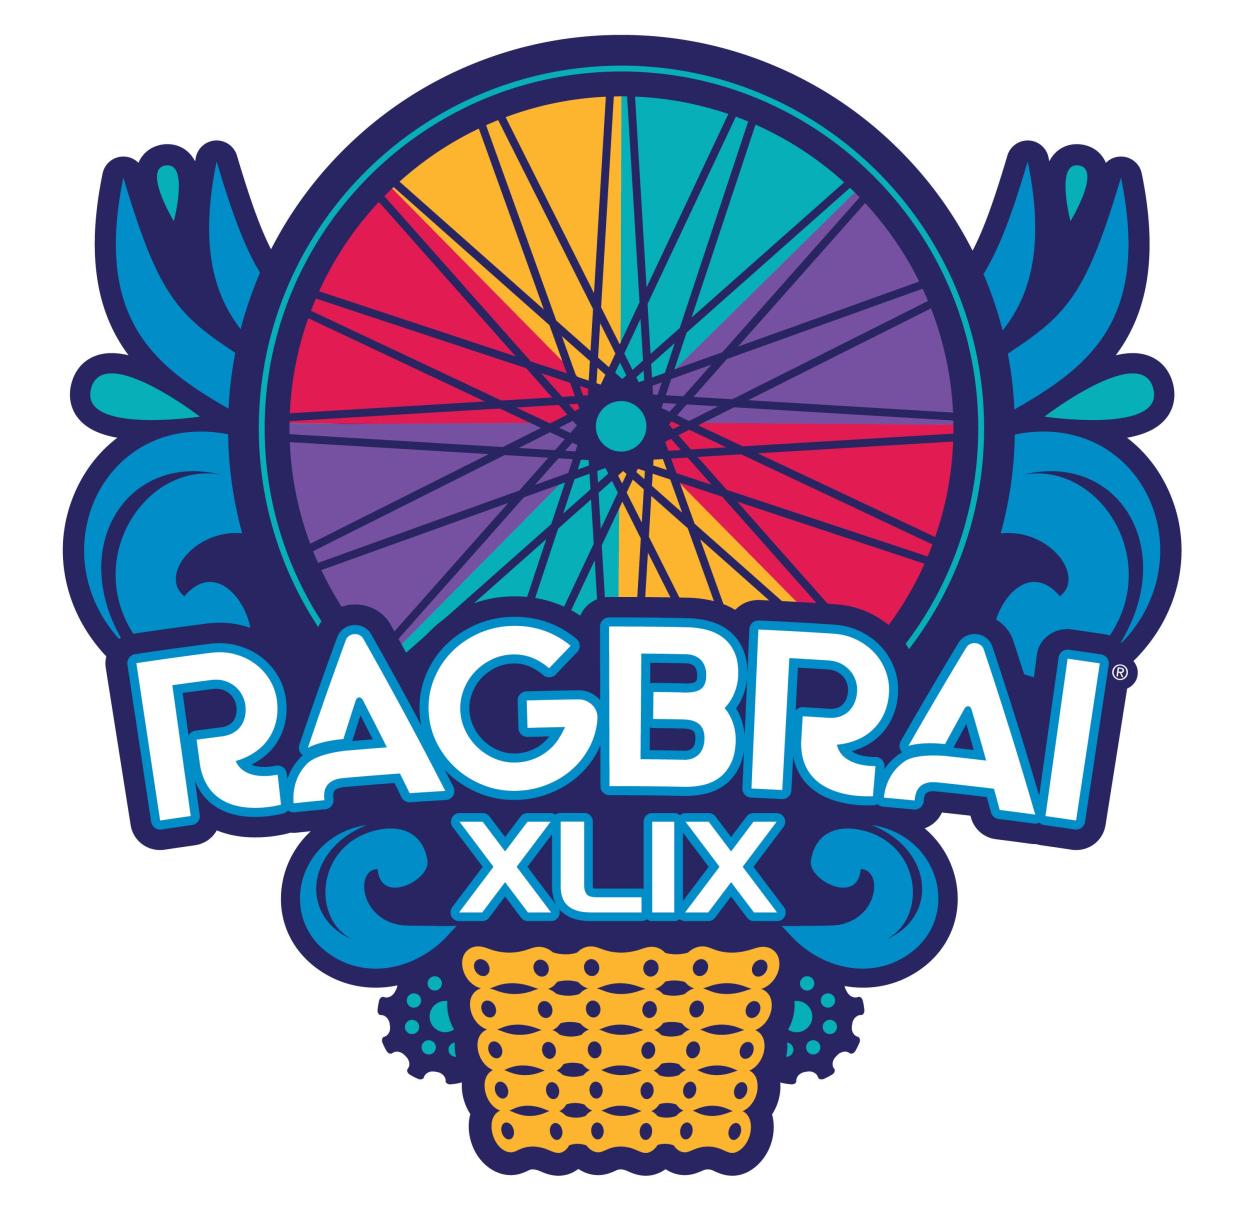 The official RAGBRAI XLIX logo for the ride across Iowa, July 23-30, 2022.